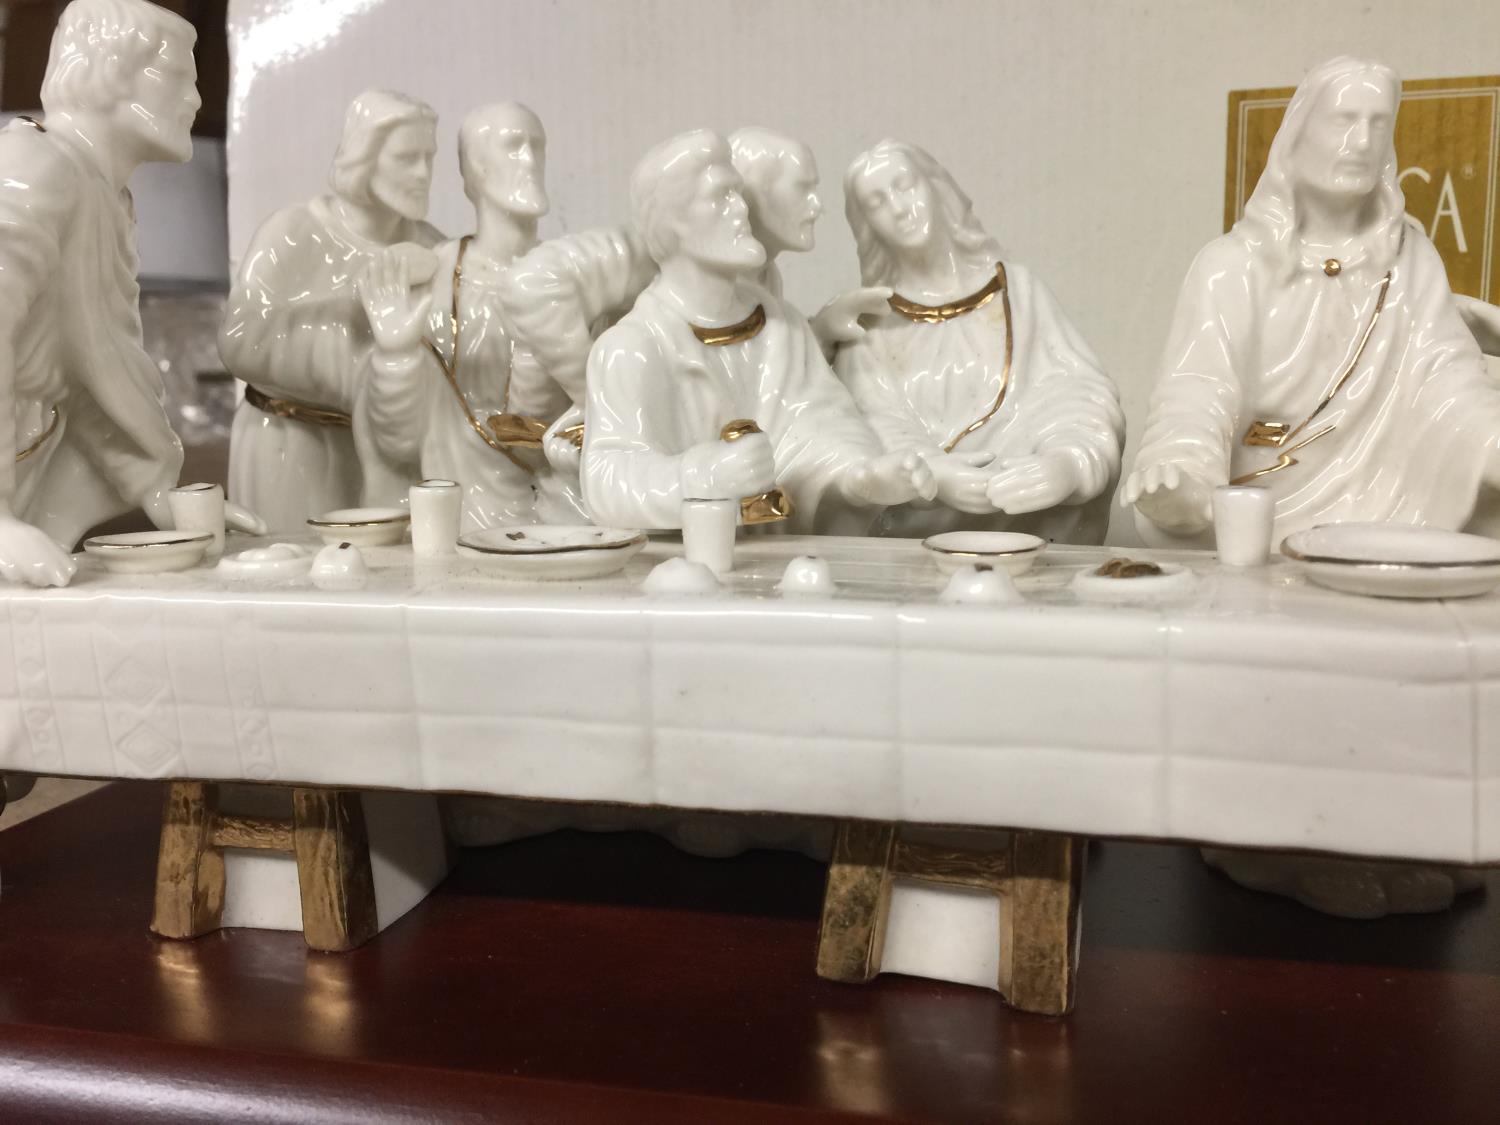 A CERAMIC REPRESENTATION OF JESUS CHRIST WITH HIS DISCIPLES AT THE LAST SUPPER BY MIKASA - Image 3 of 4